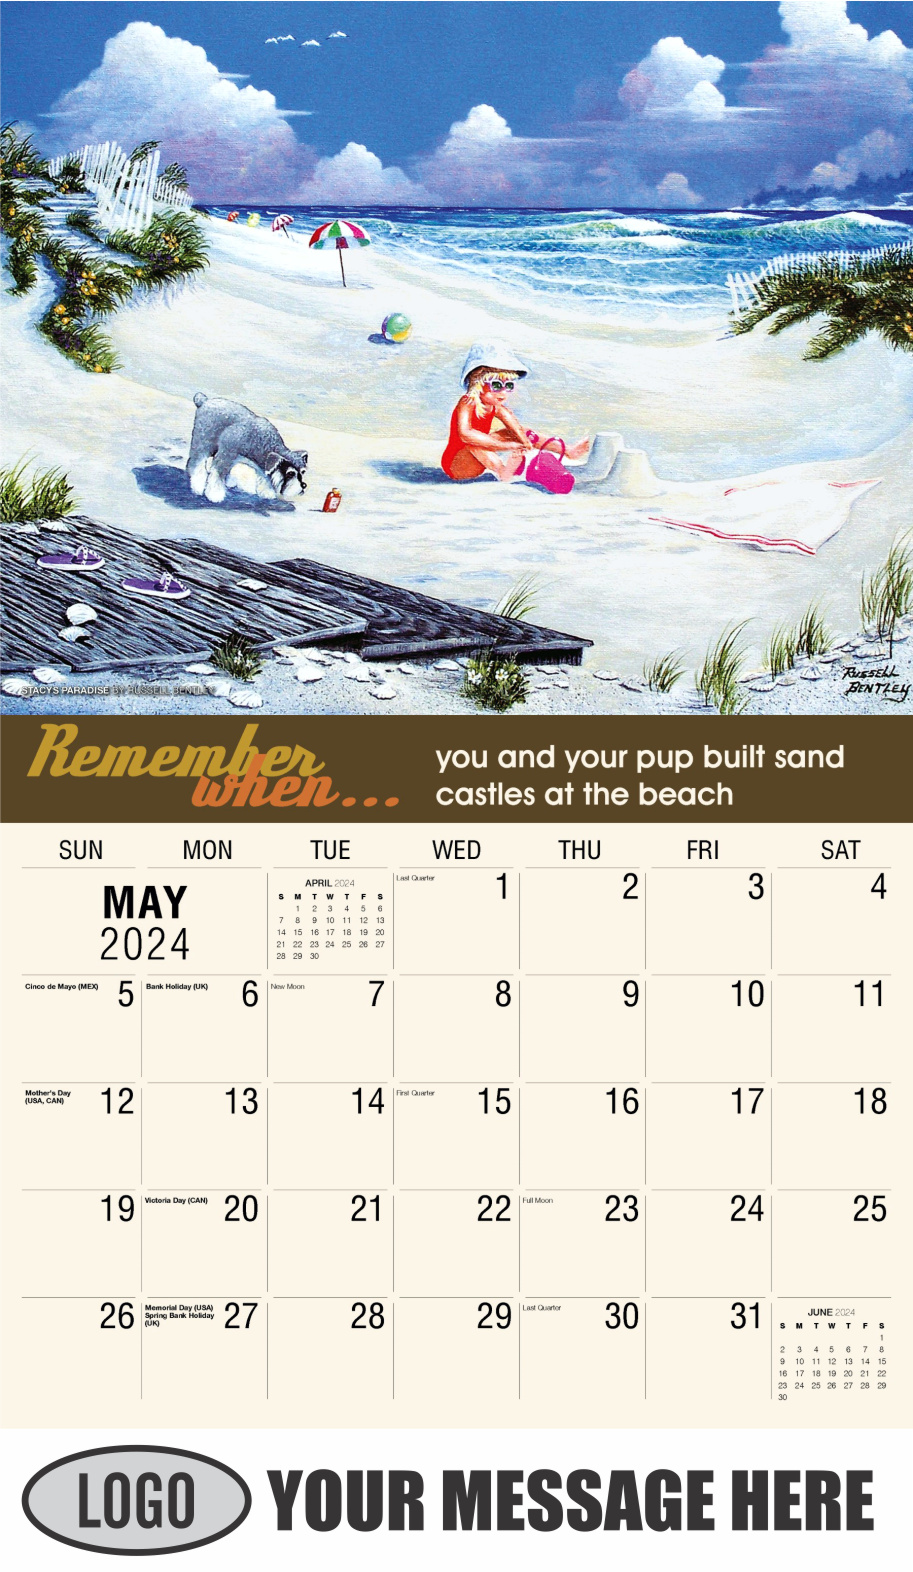 Remember When 2024 Business Advertising Calendar - May